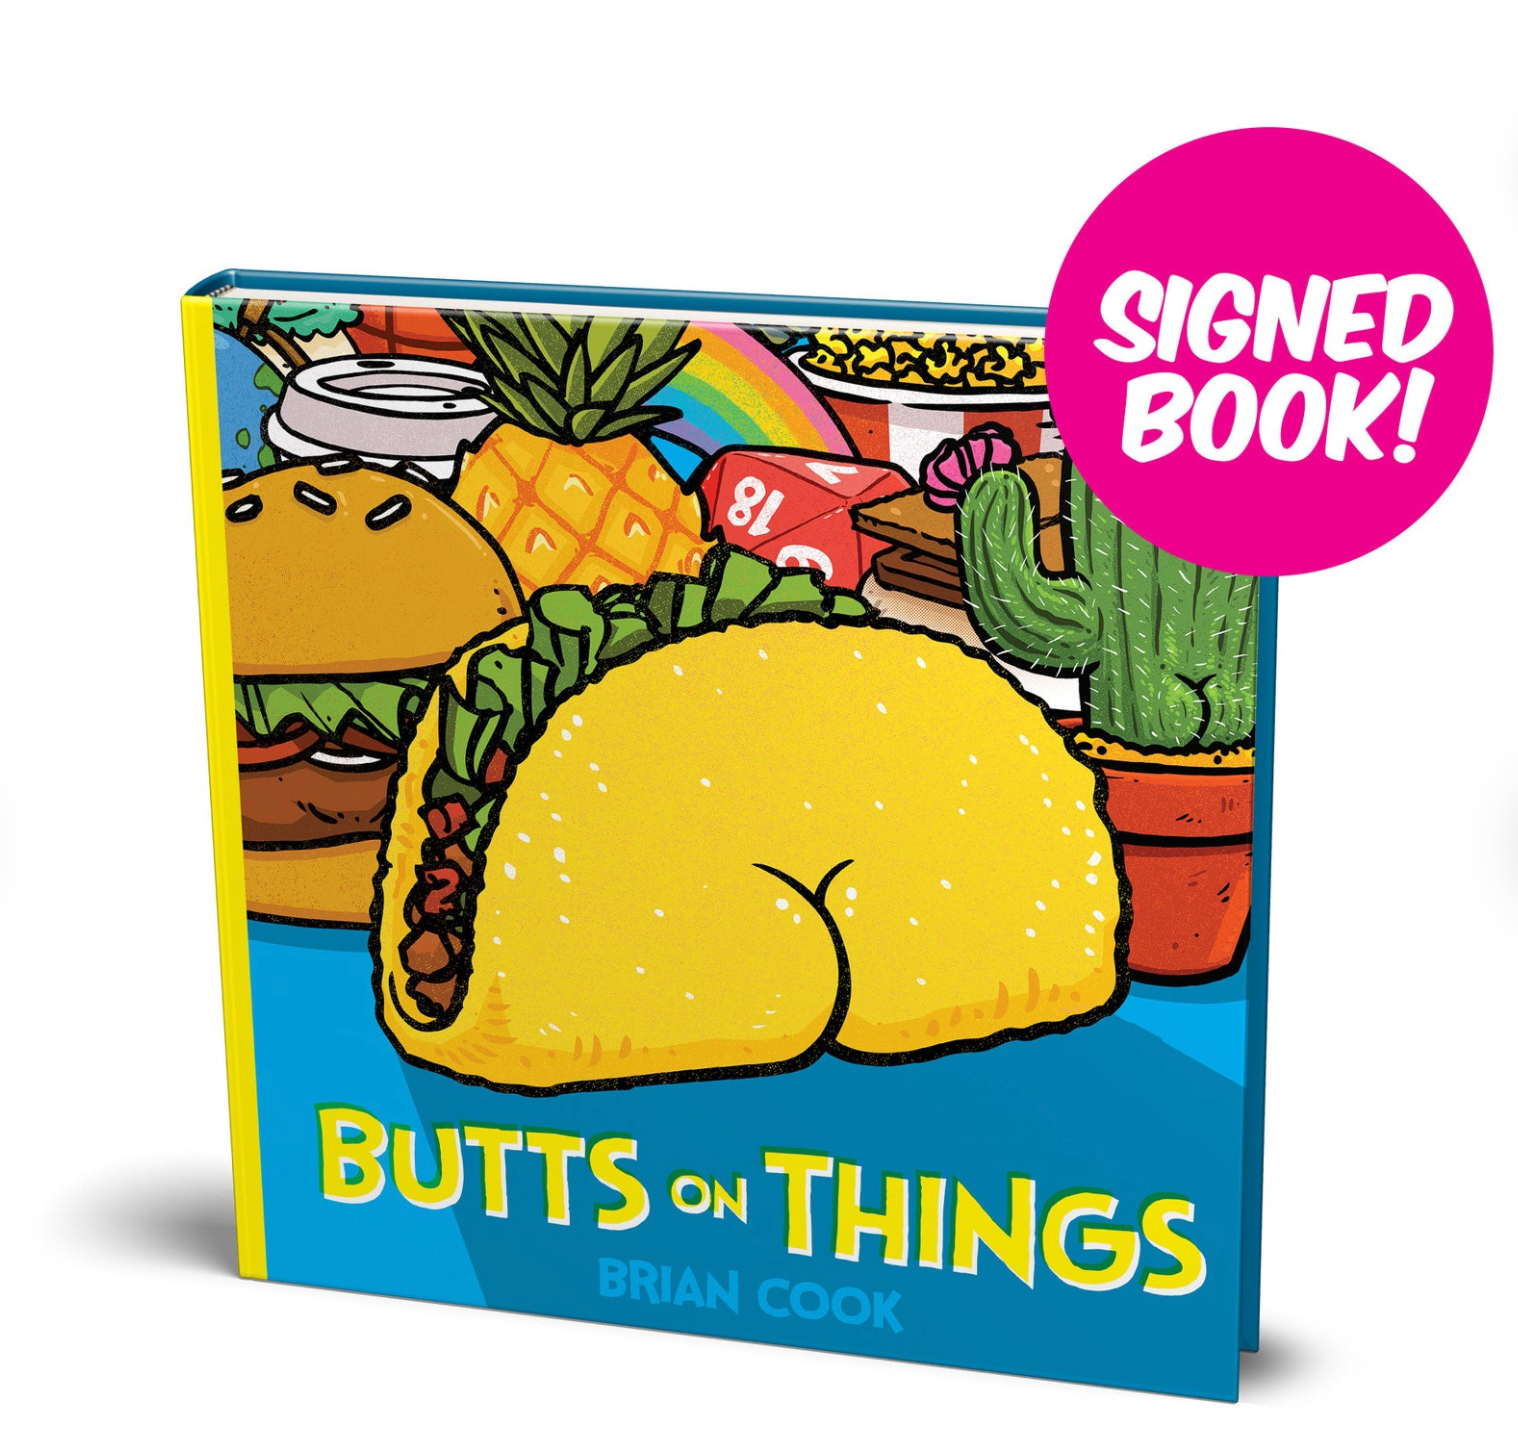 Book - Art Book - Butts on Things